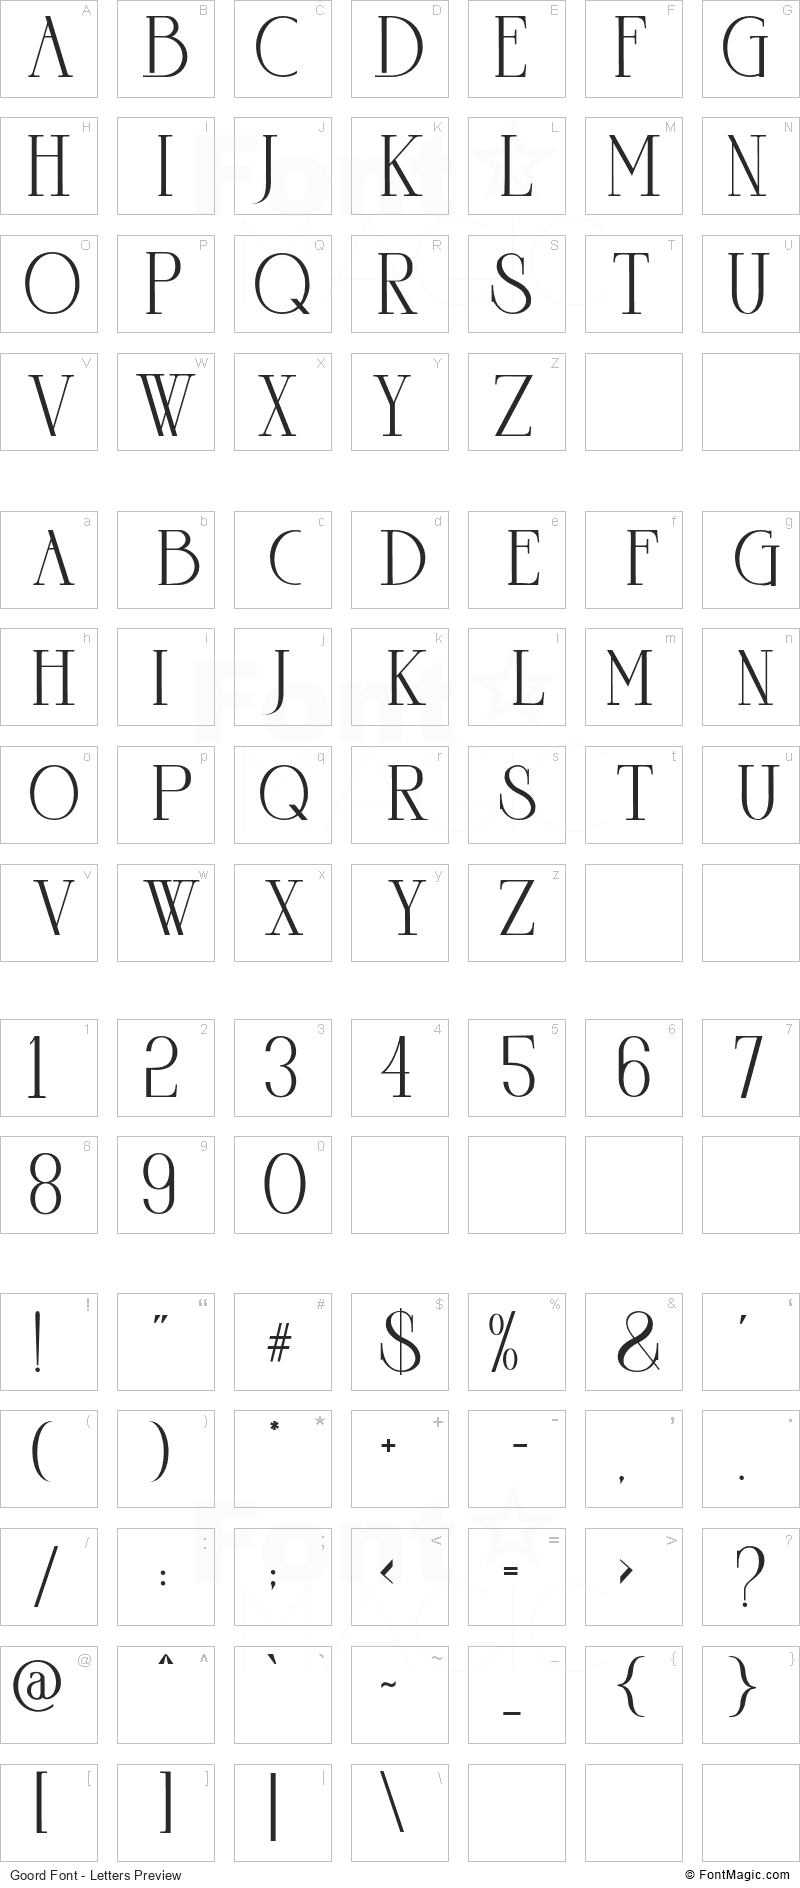 Goord Font - All Latters Preview Chart